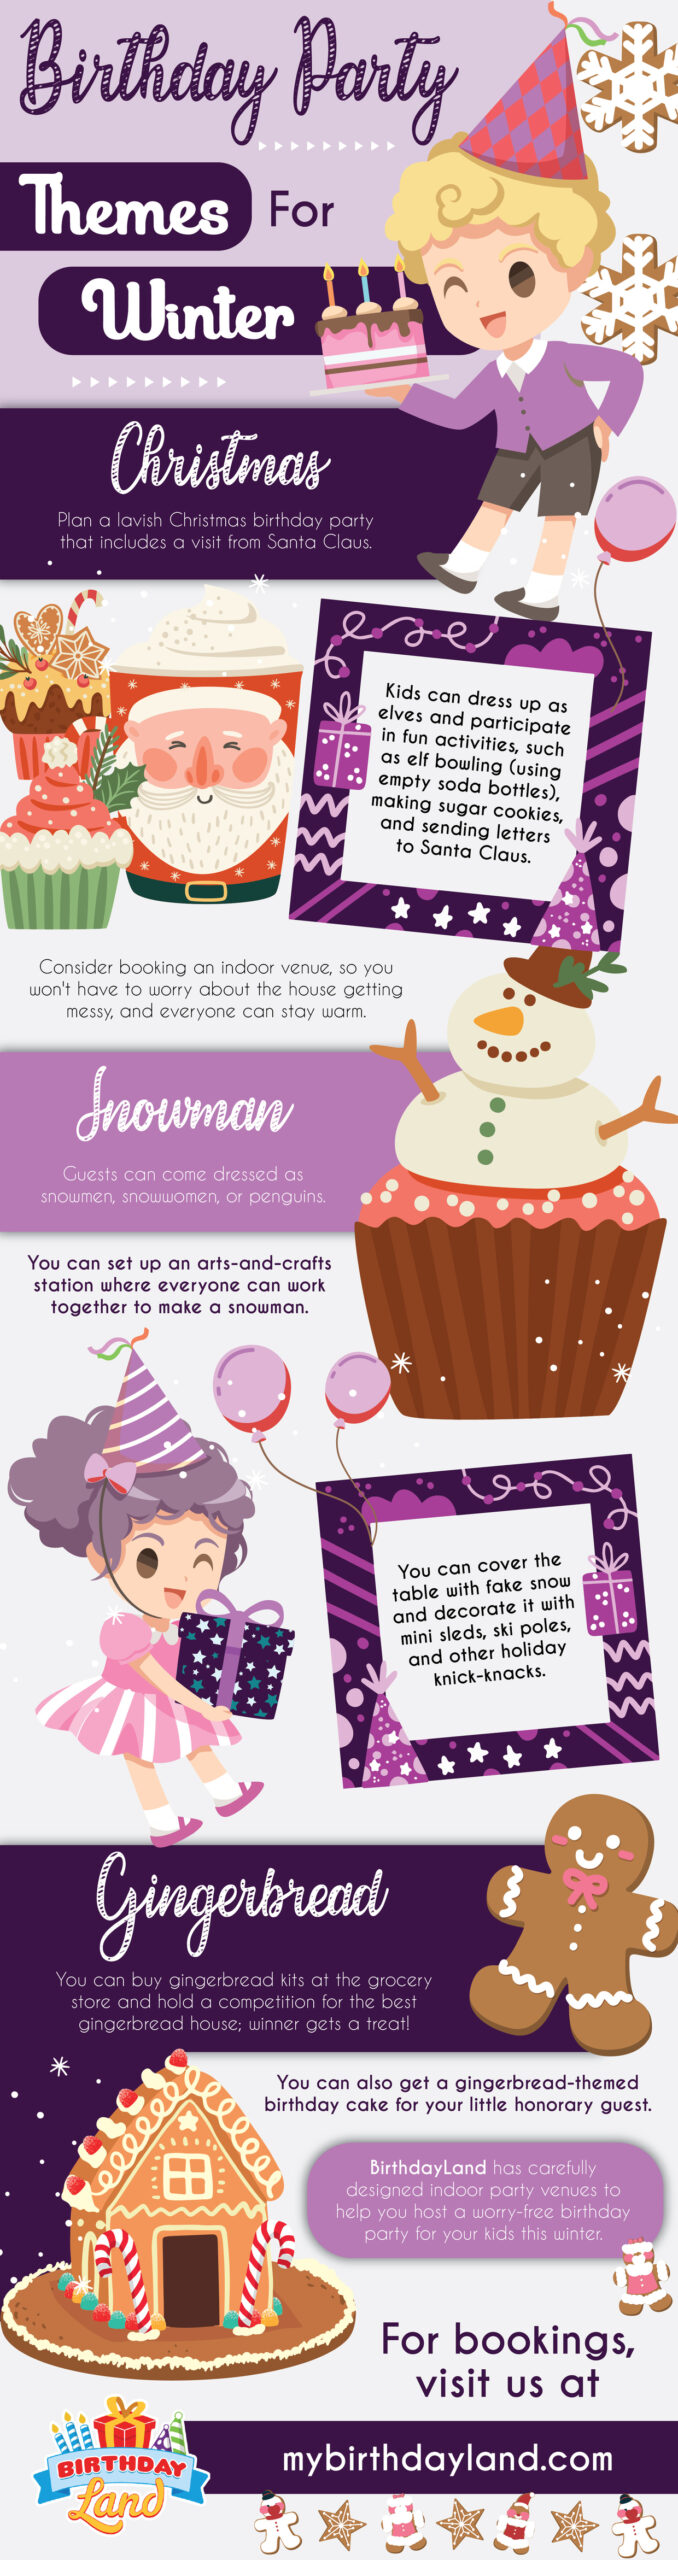 birthday party themes for winter